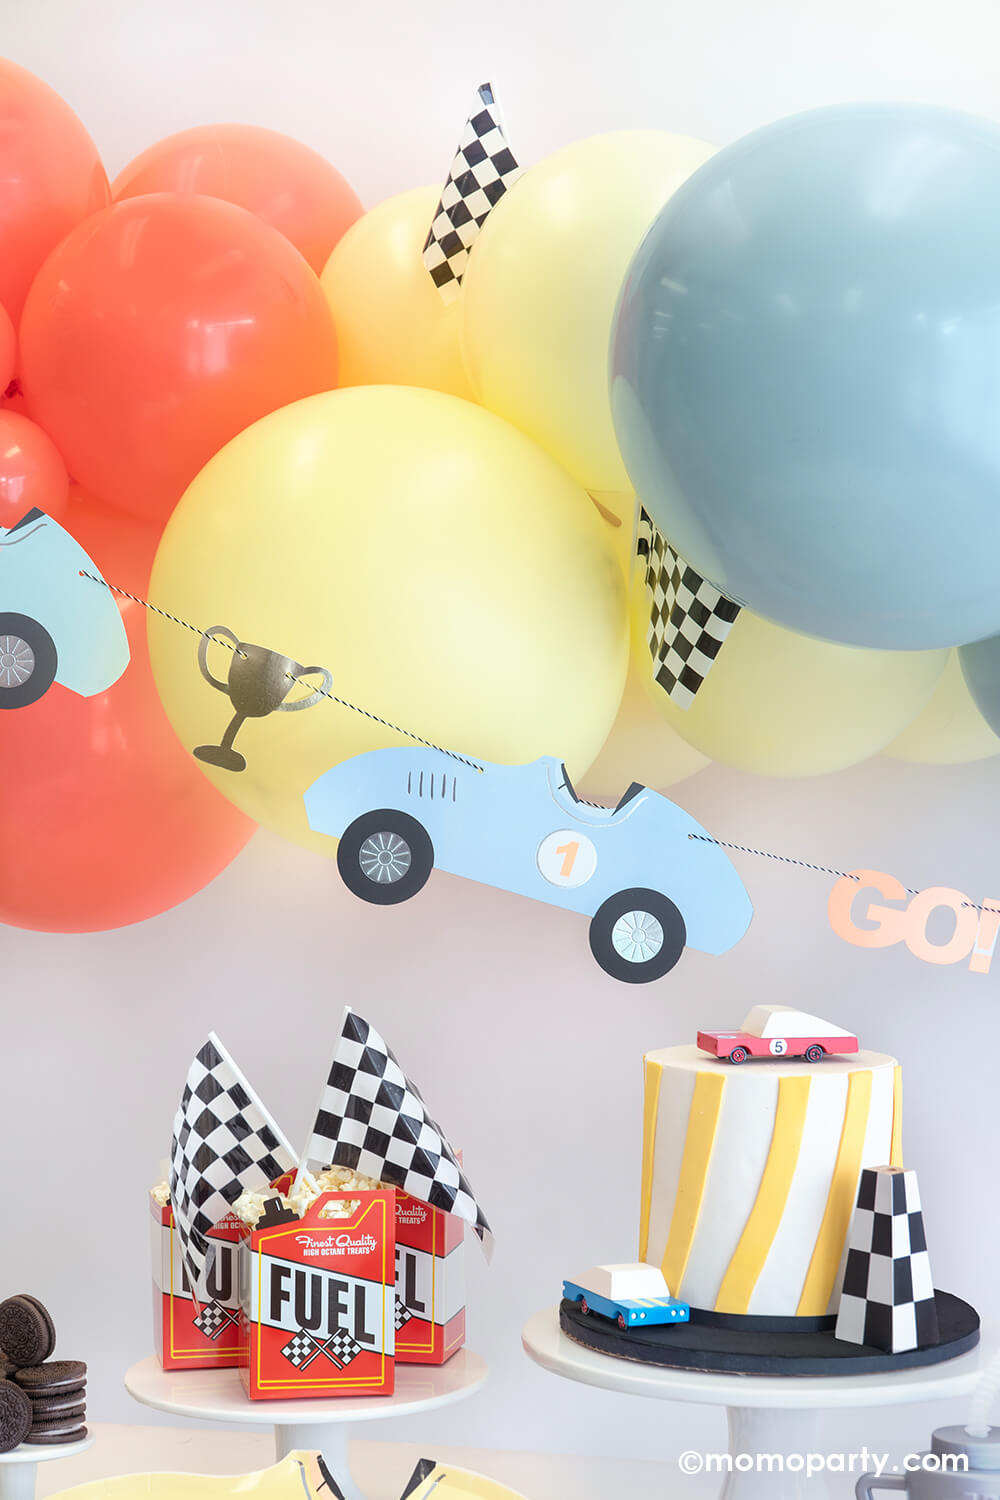 A festive race car themed party set up by Momo Party featuring a pastel balloon garland adorned with checkered flags, underneath hung a vintage race car party garland. On the table are some fuel treat boxes topped with checkered flags and a modern birthday cake topped with a race car wooden toy car toppers - a perfect inspiration for a kid's "Two Fast" second birthday party or "Fast One" first birthday party.